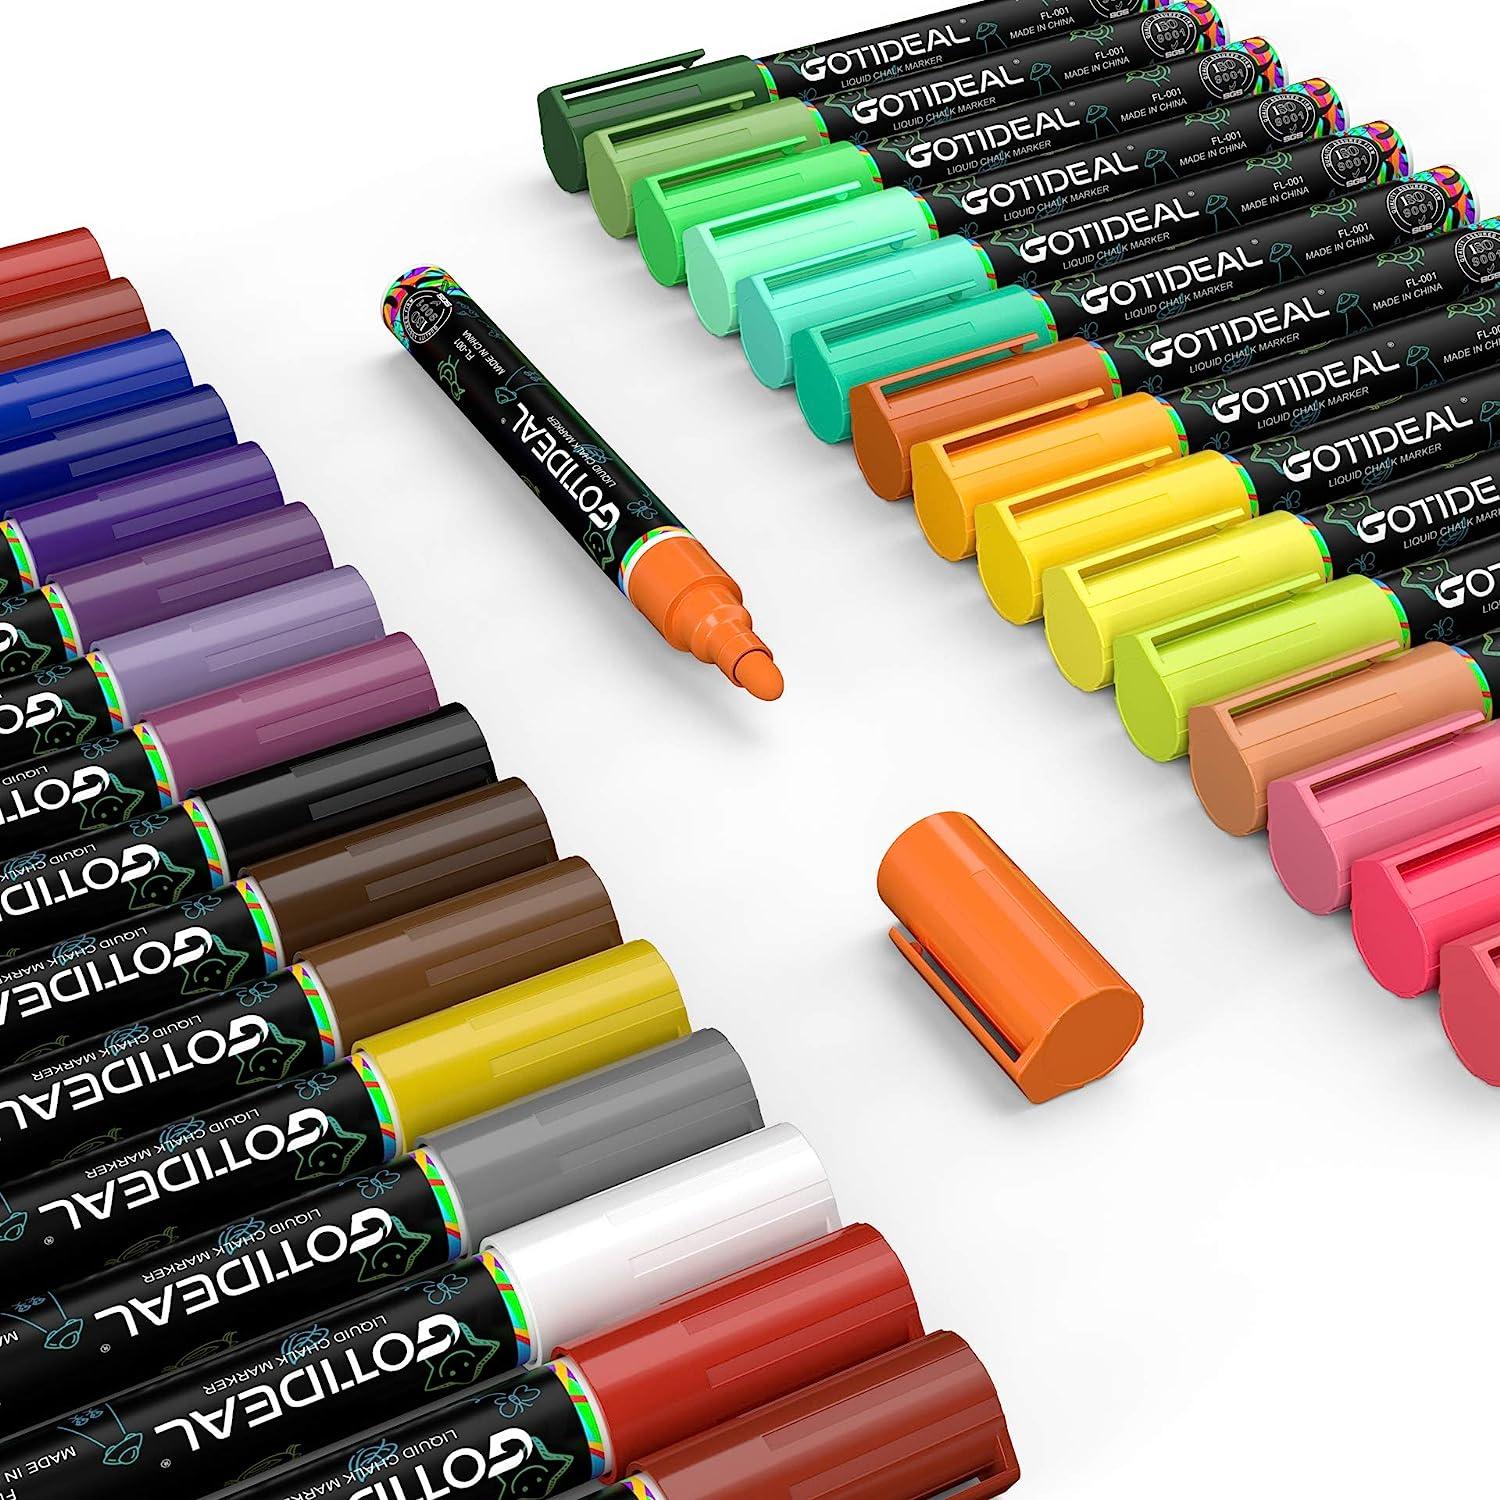 GOTIDEAL Liquid Chalk Markers, 30 colors Premium Window Chalkboard Neon Pens,  Including 4 Metallic Colors, Painting and Drawing for Kids and Adults,  Bistro & Restaurant, Wet Erase - Reversible Tip